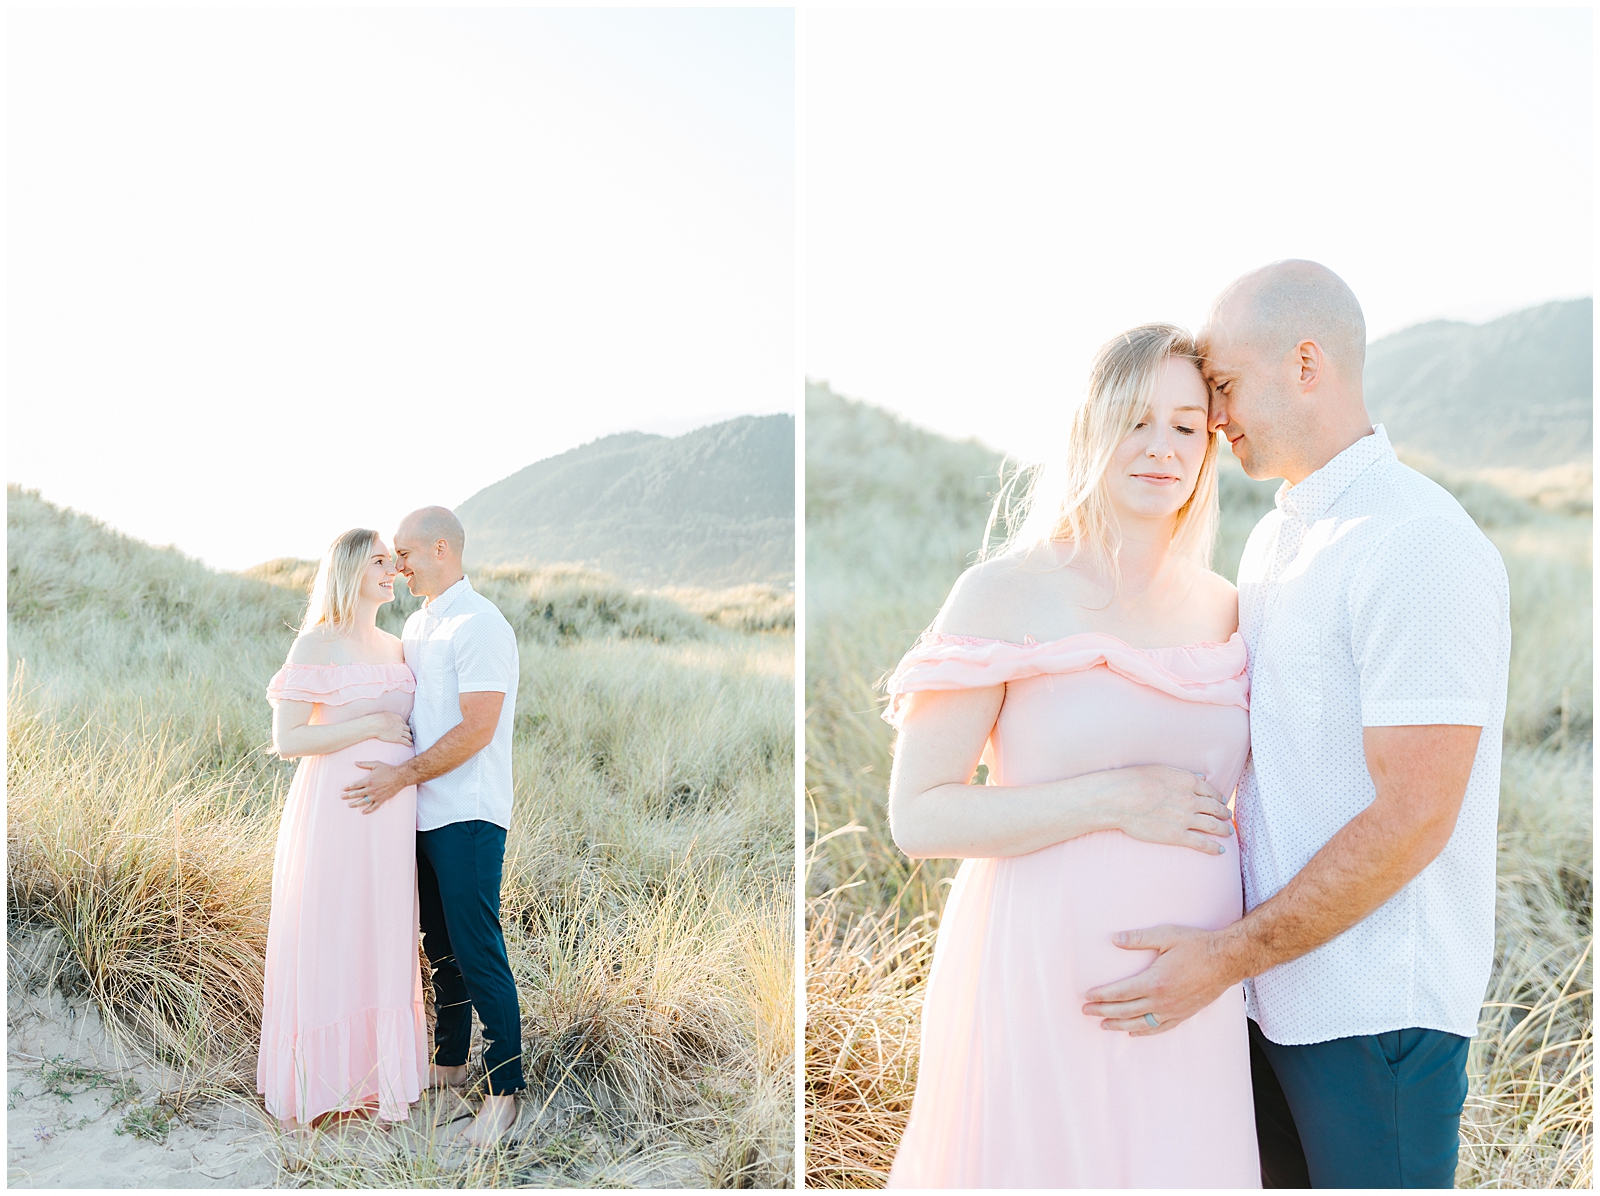 Beachy Maternity Destination Session along the Oregon Coast with a Blush Dress and Husband in Navy and White